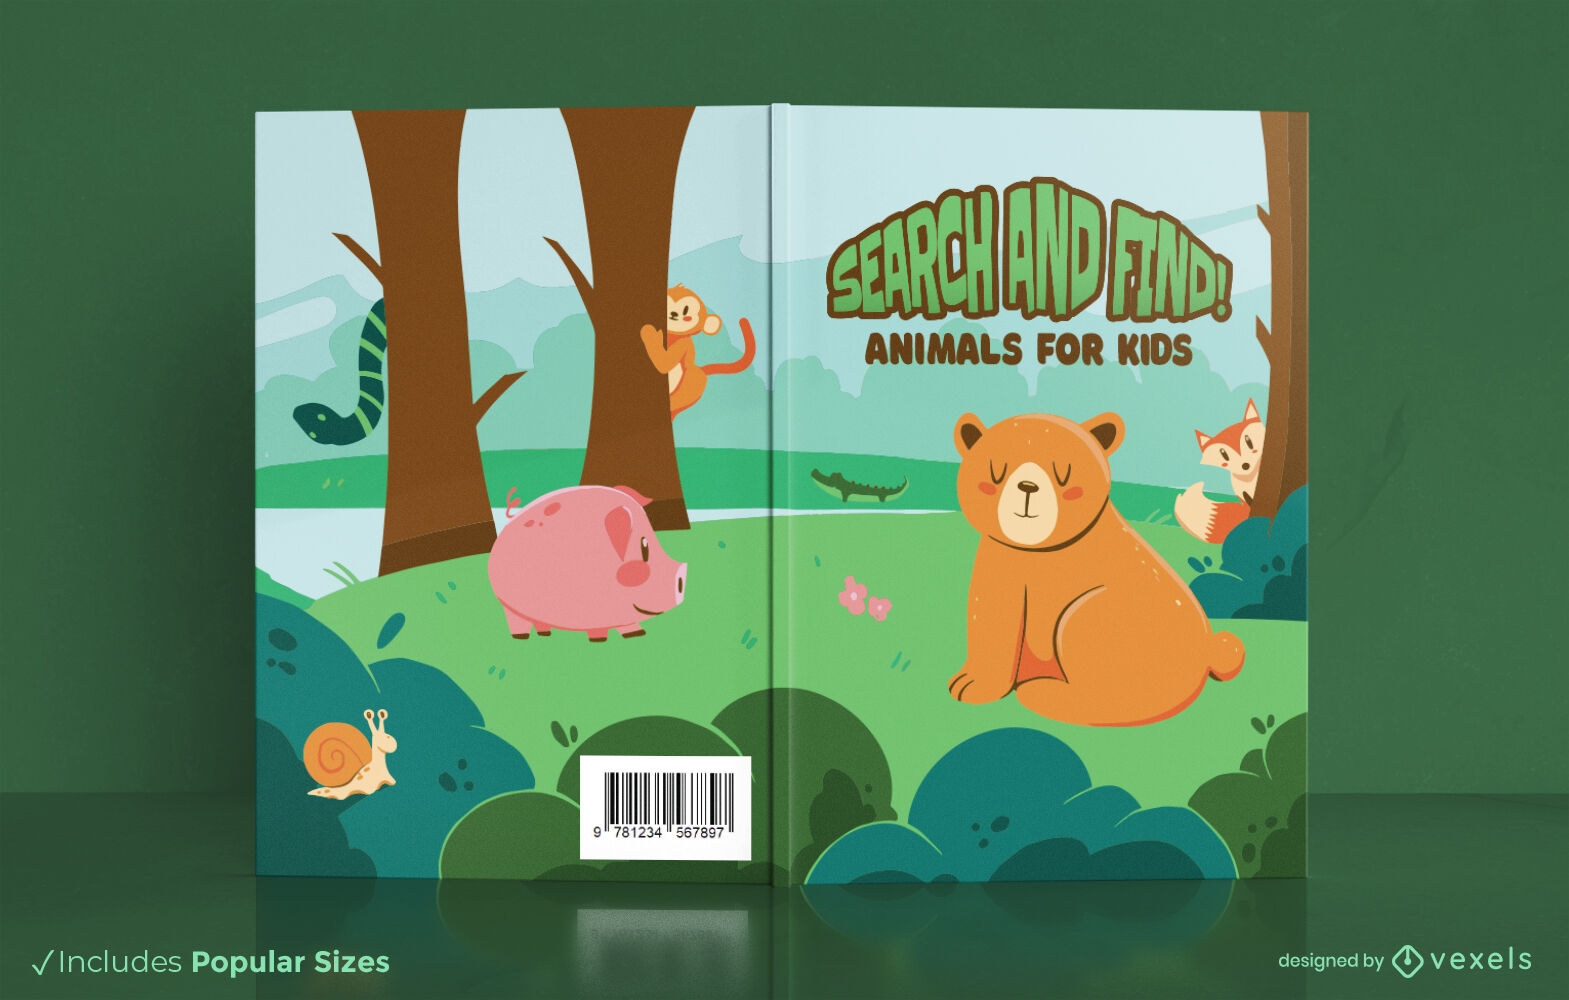 Search and find animals book cover